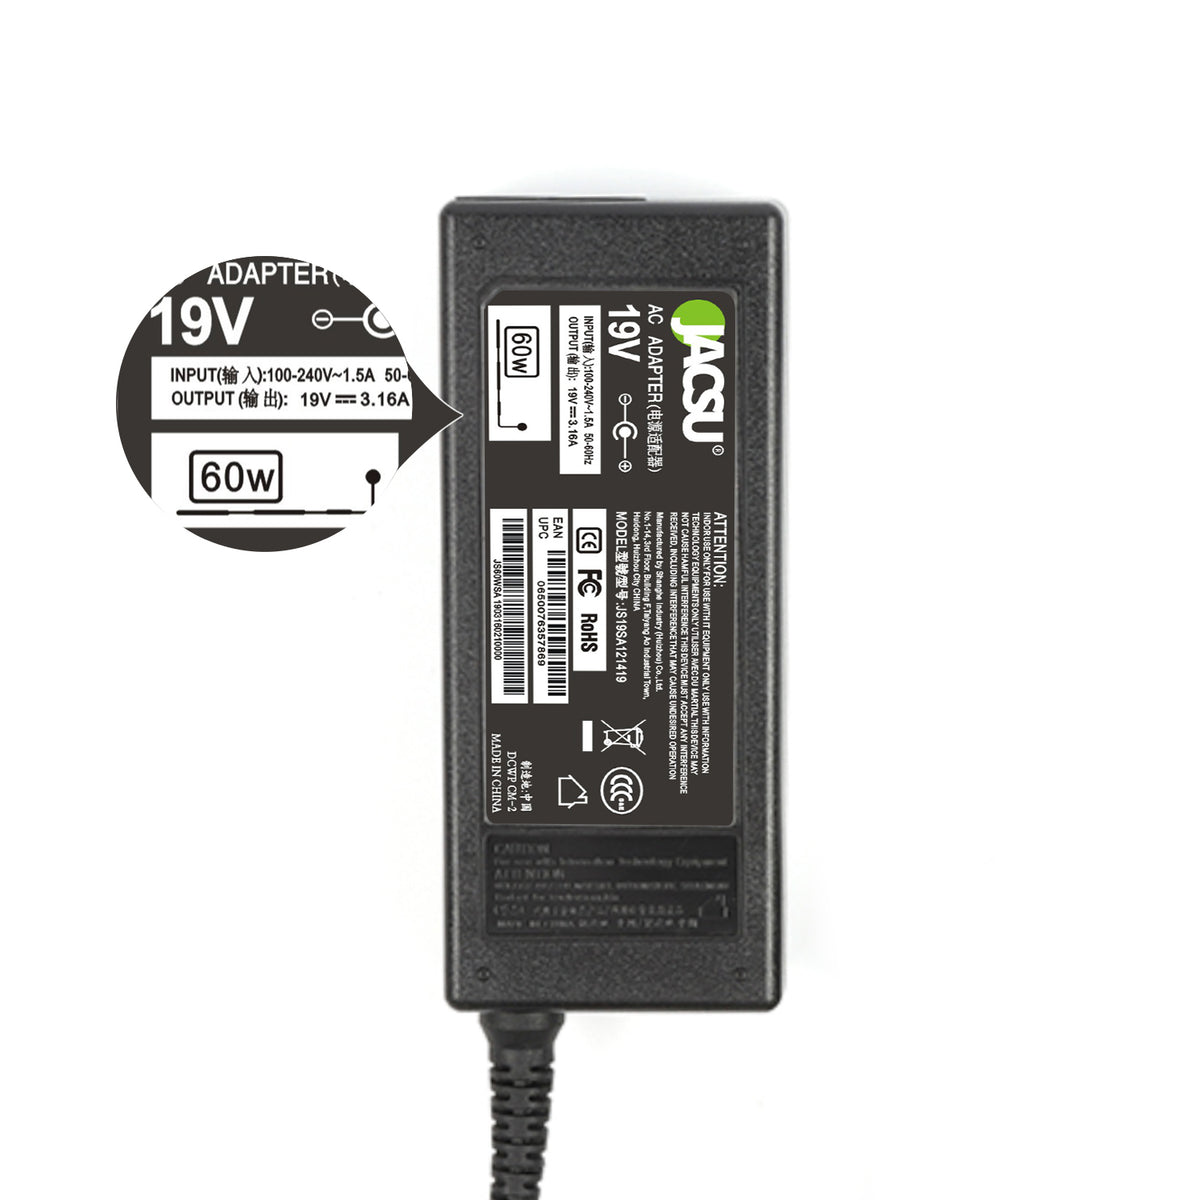 Jacsu 19V 3.16A 60W 5.5X3.0mm Power AC Adapter for Samsung charger AD-6019R CPA09-004A ADP-60ZH